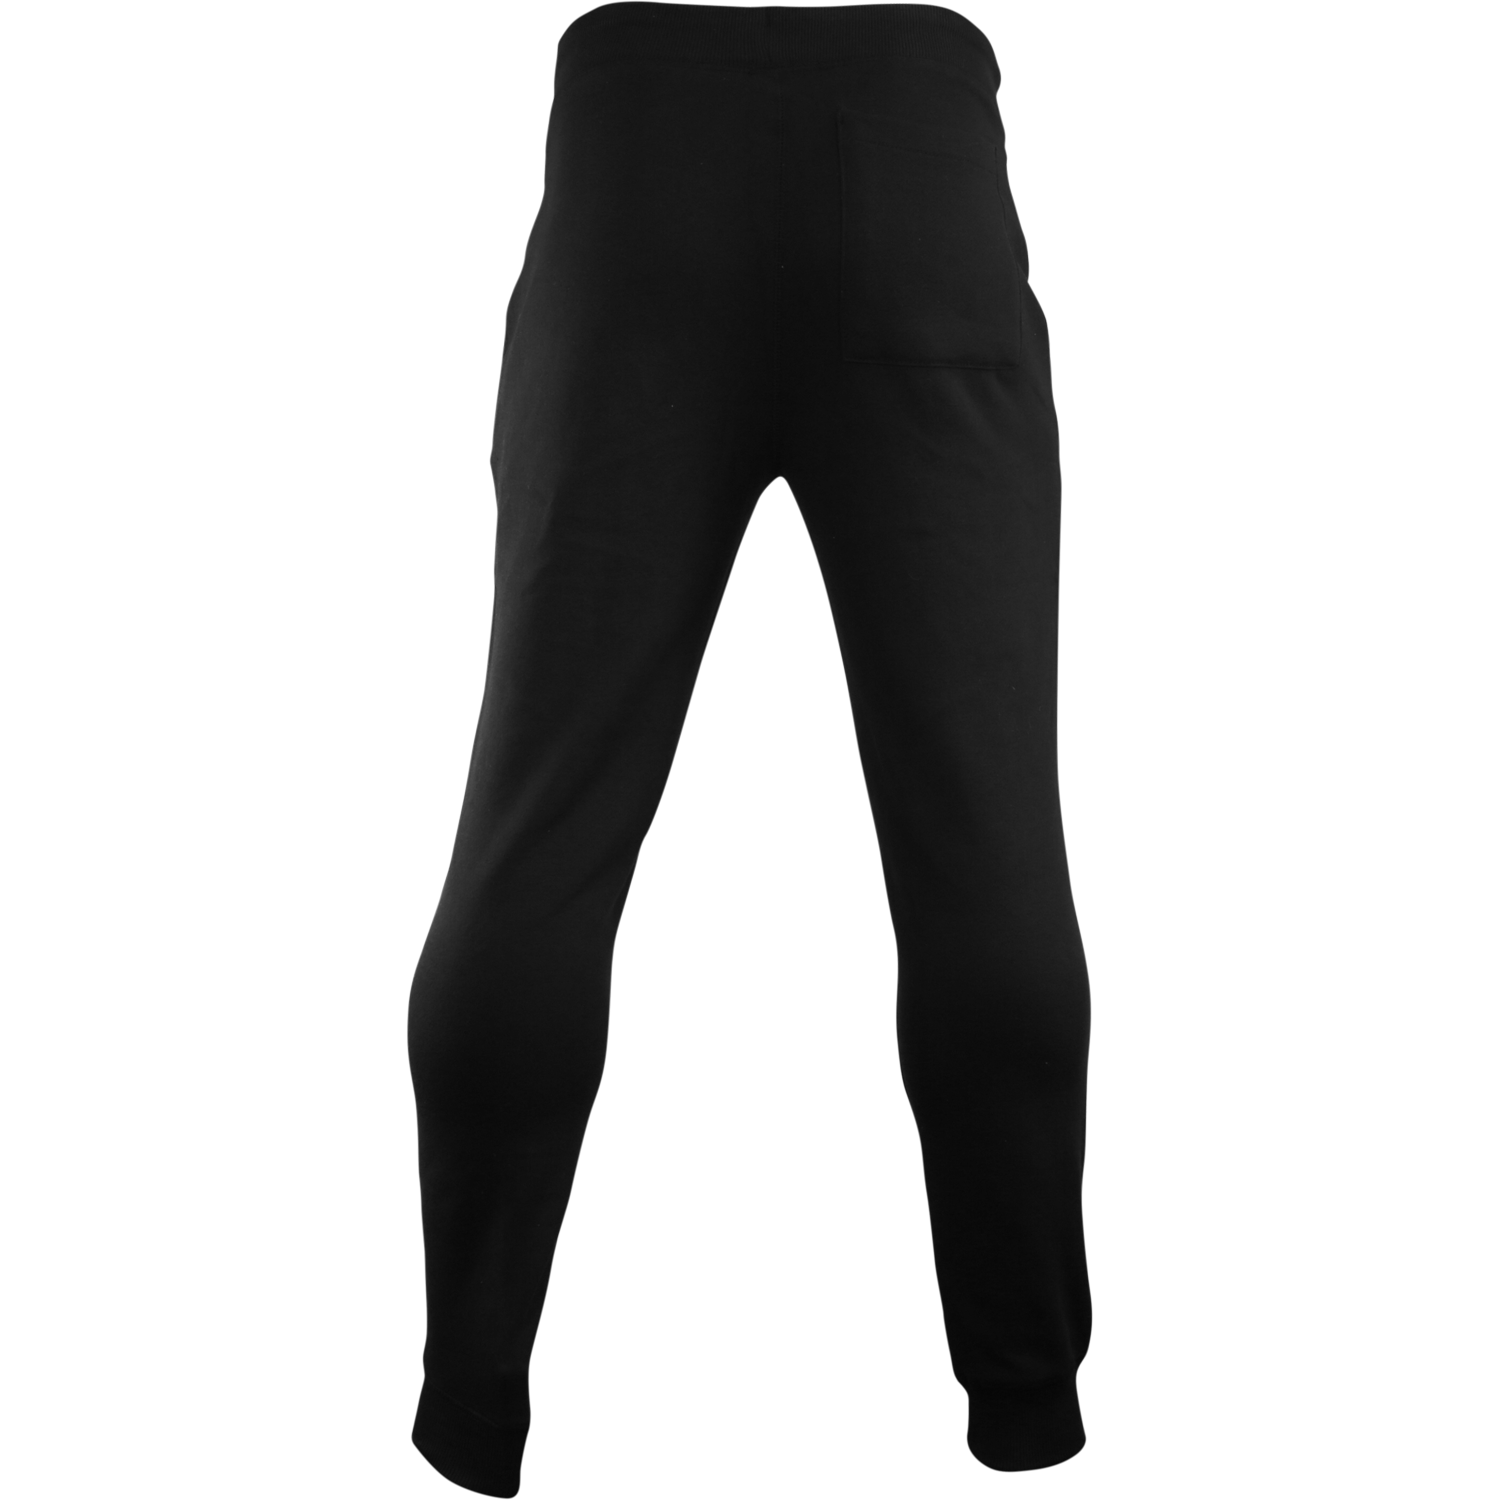 1DAYYOUMAY Black Joggers with White Lettering - 5% Nutrition